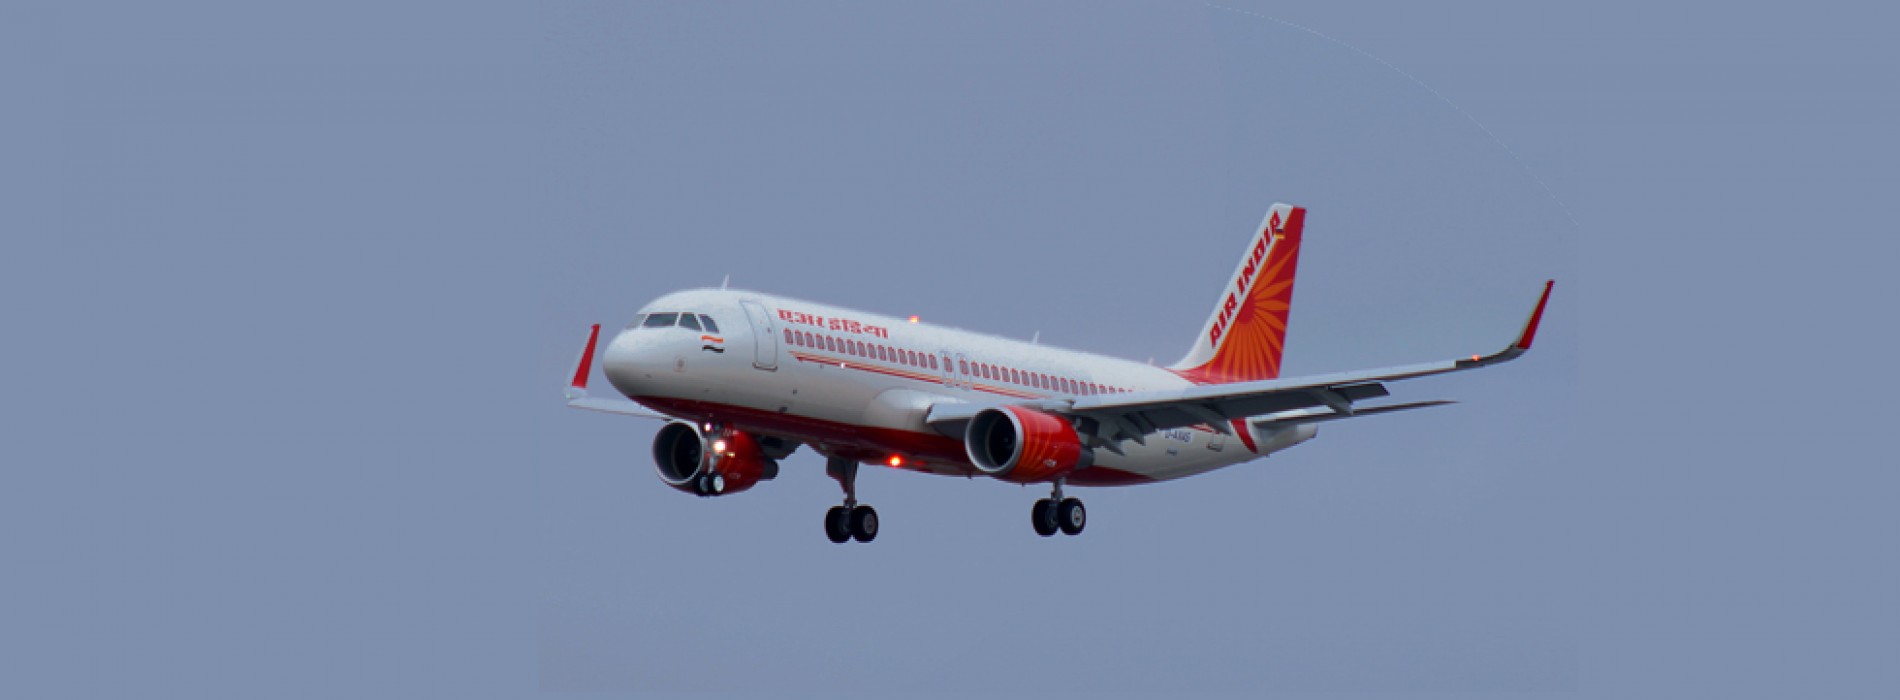 Air India opposes changes to ownership norms